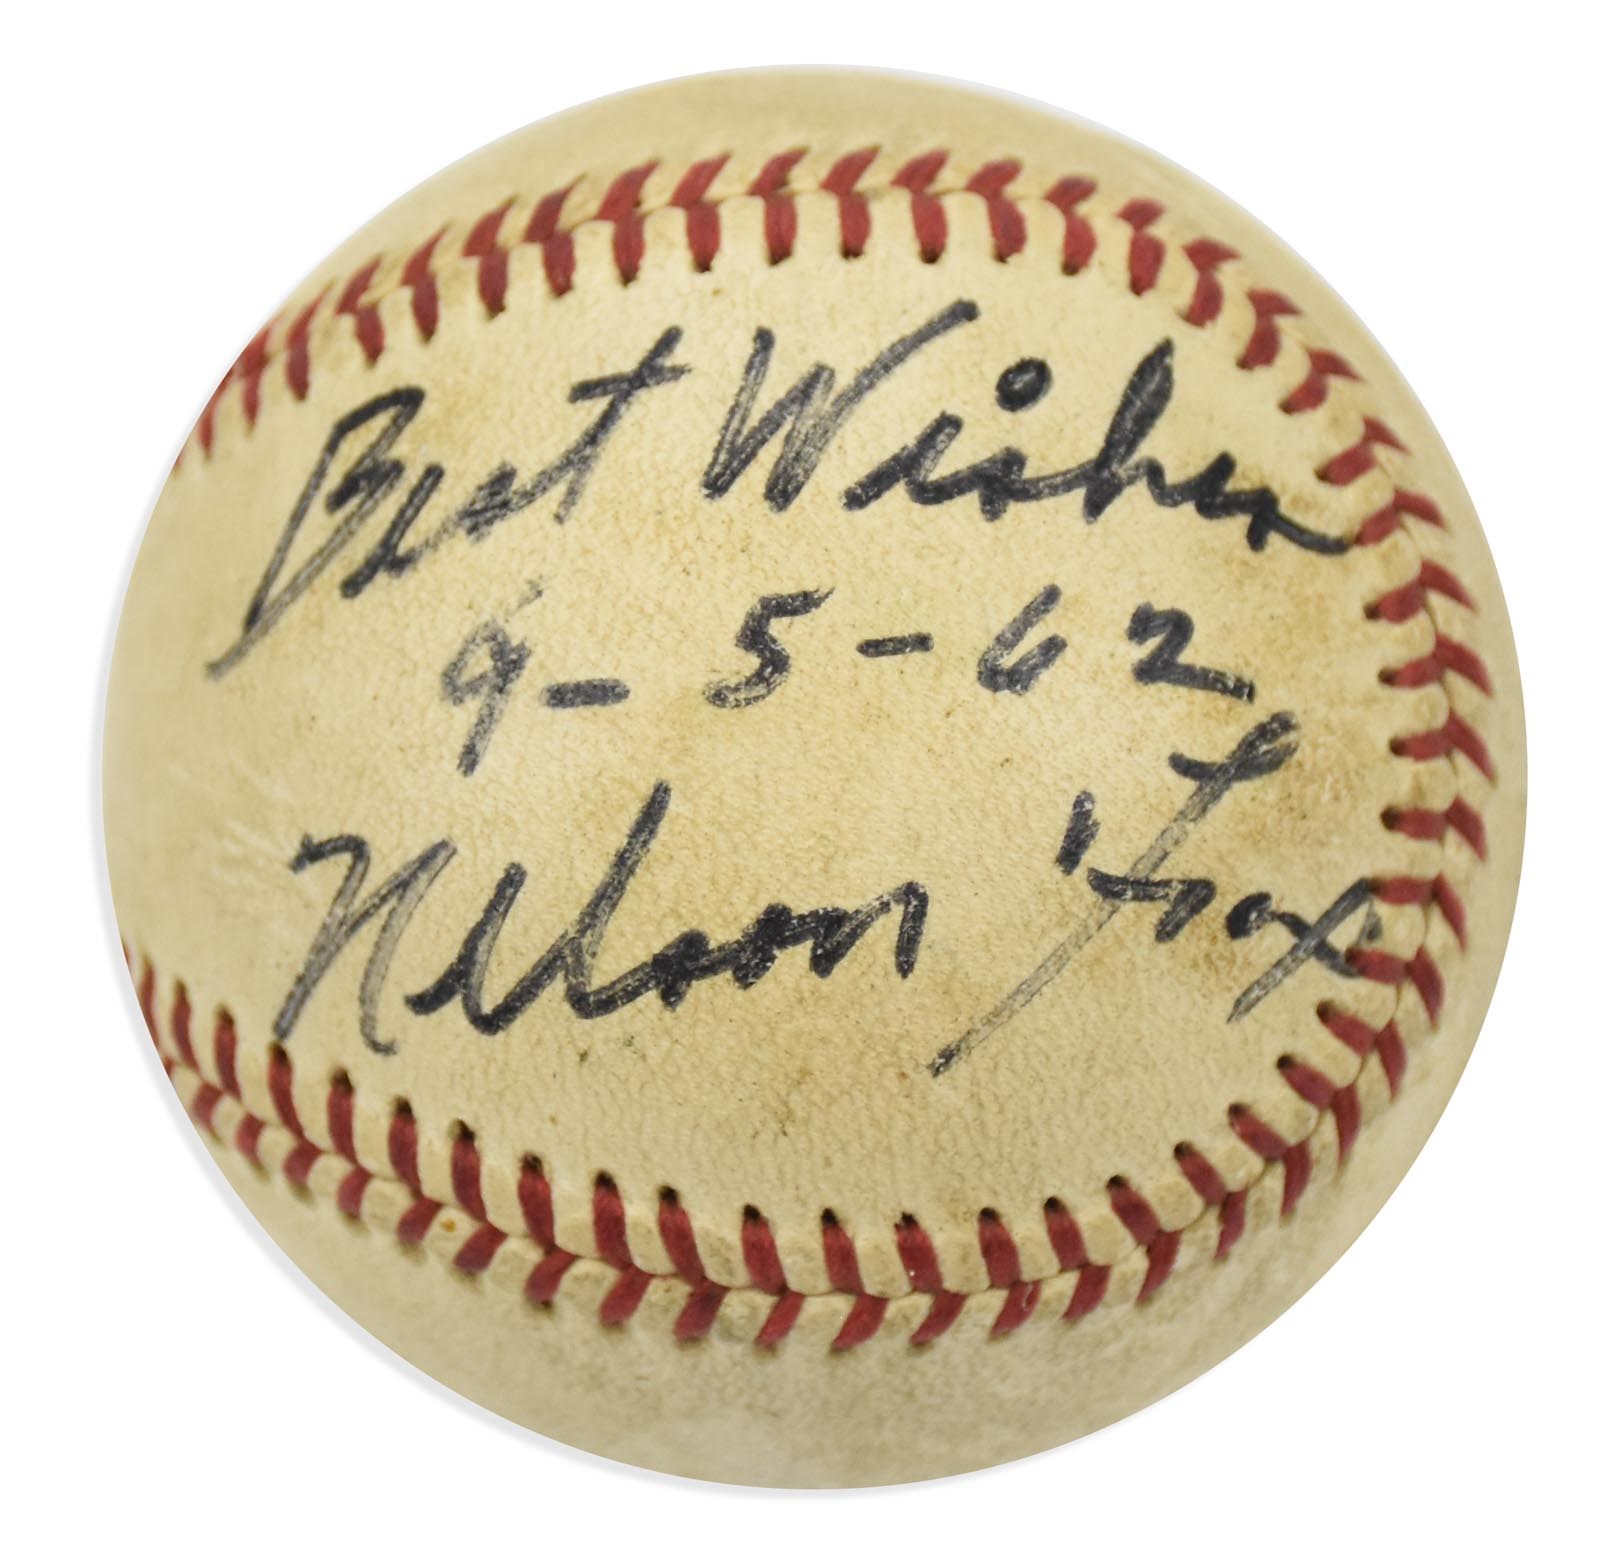 9/5/62 Nellie Fox Single Signed Game Used Baseball - with Game Ticket (PSA)